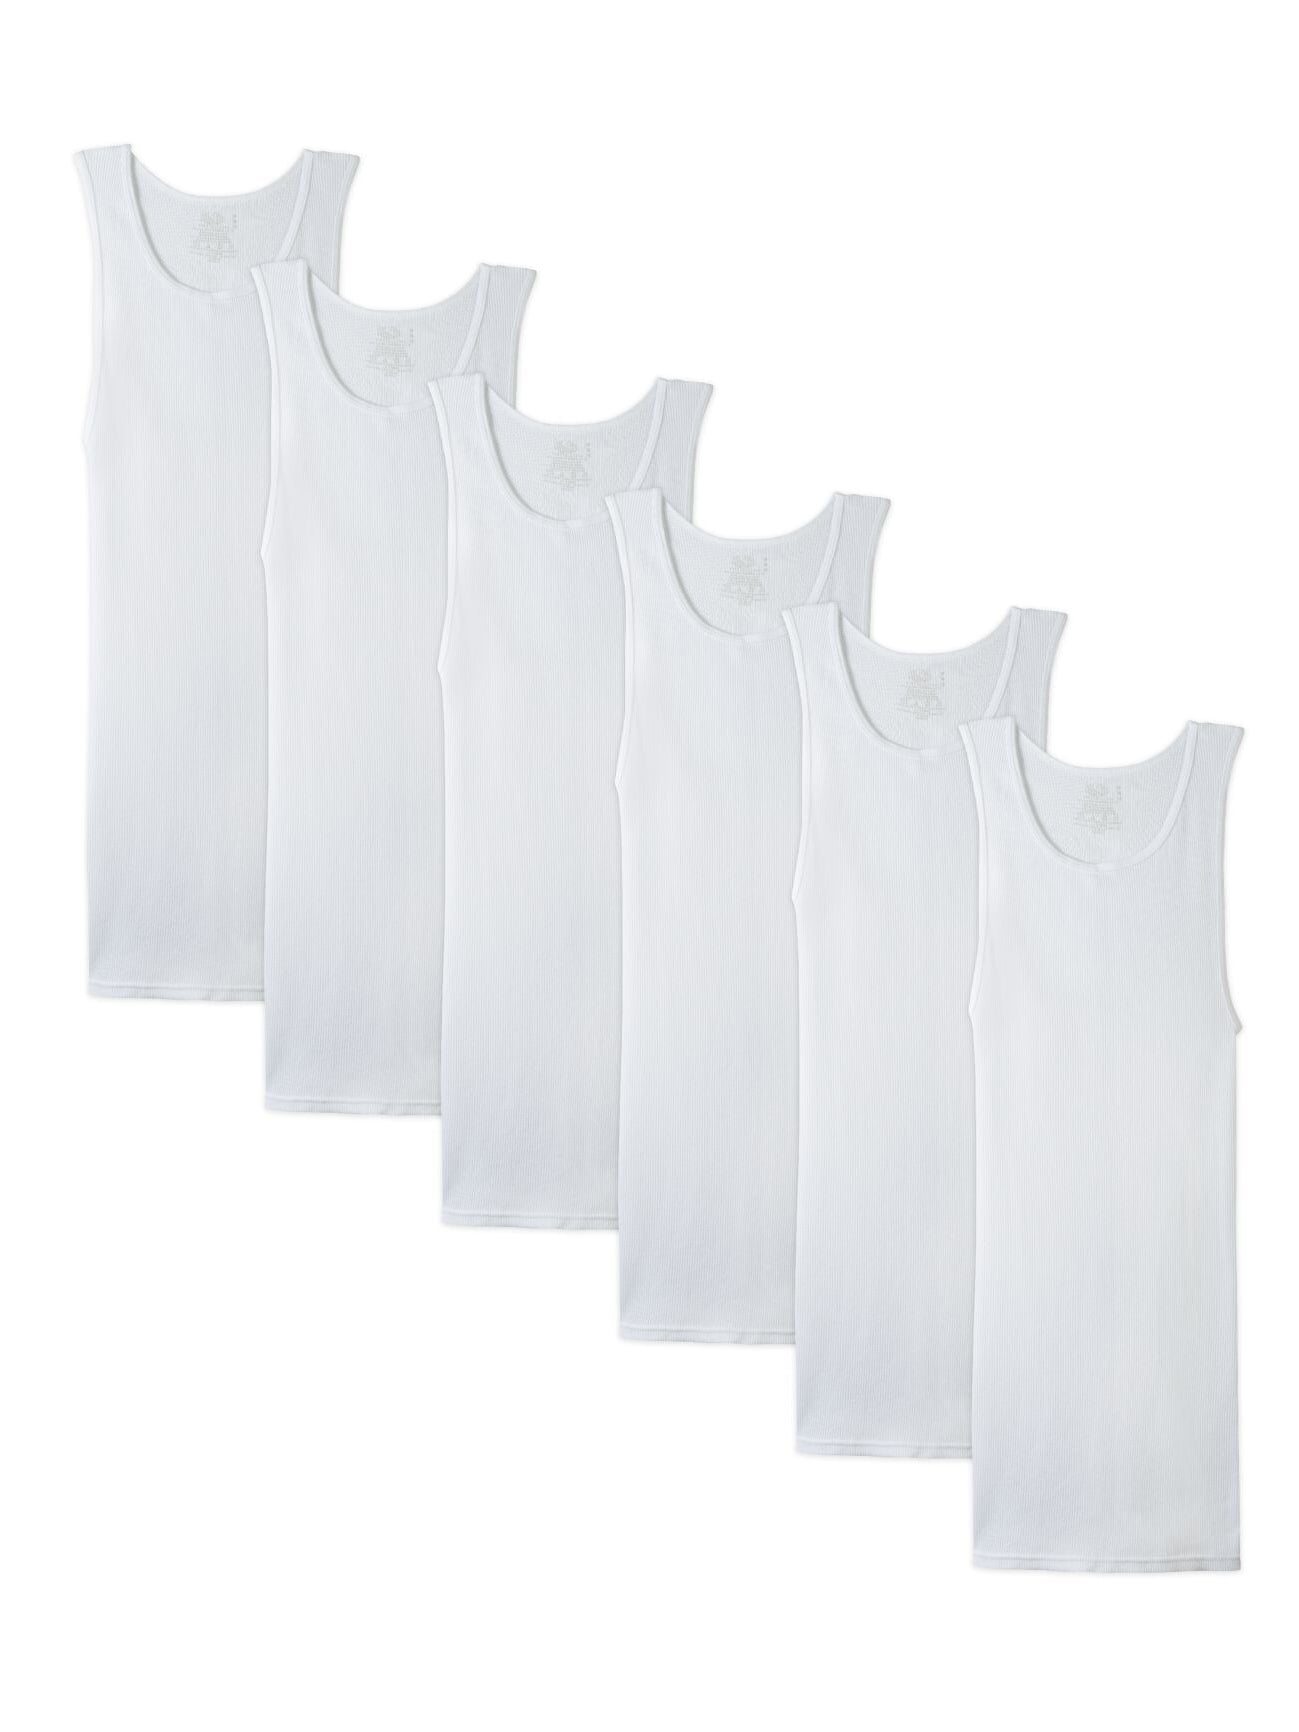 Mens Classic White A Shirts 6 Pack